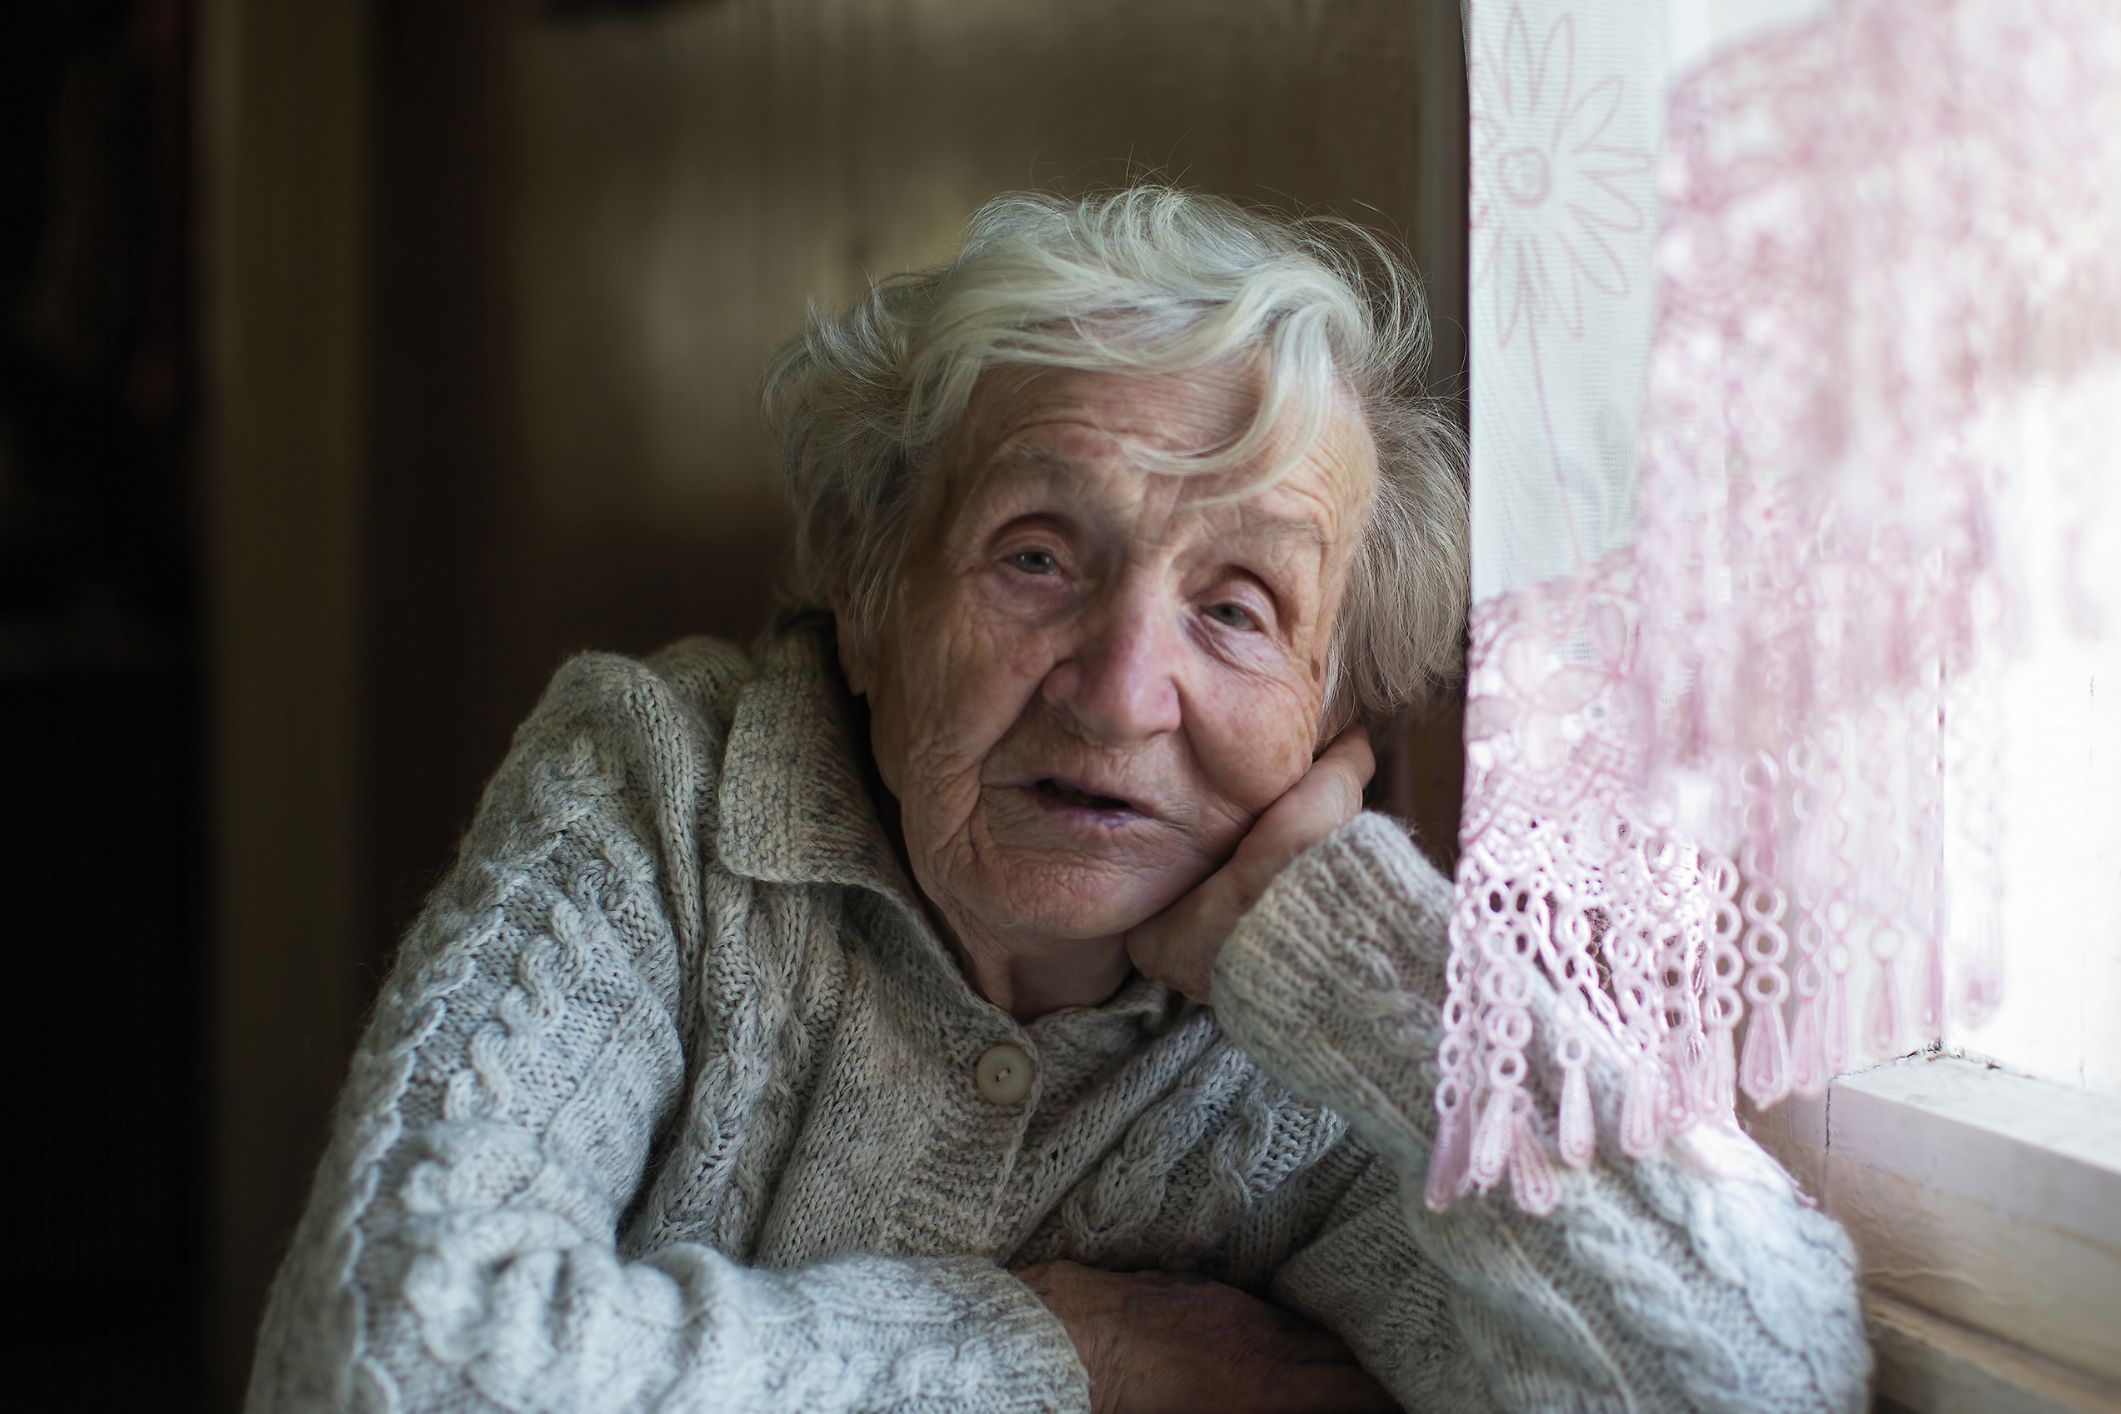 Half of Australians in aged care have depression.